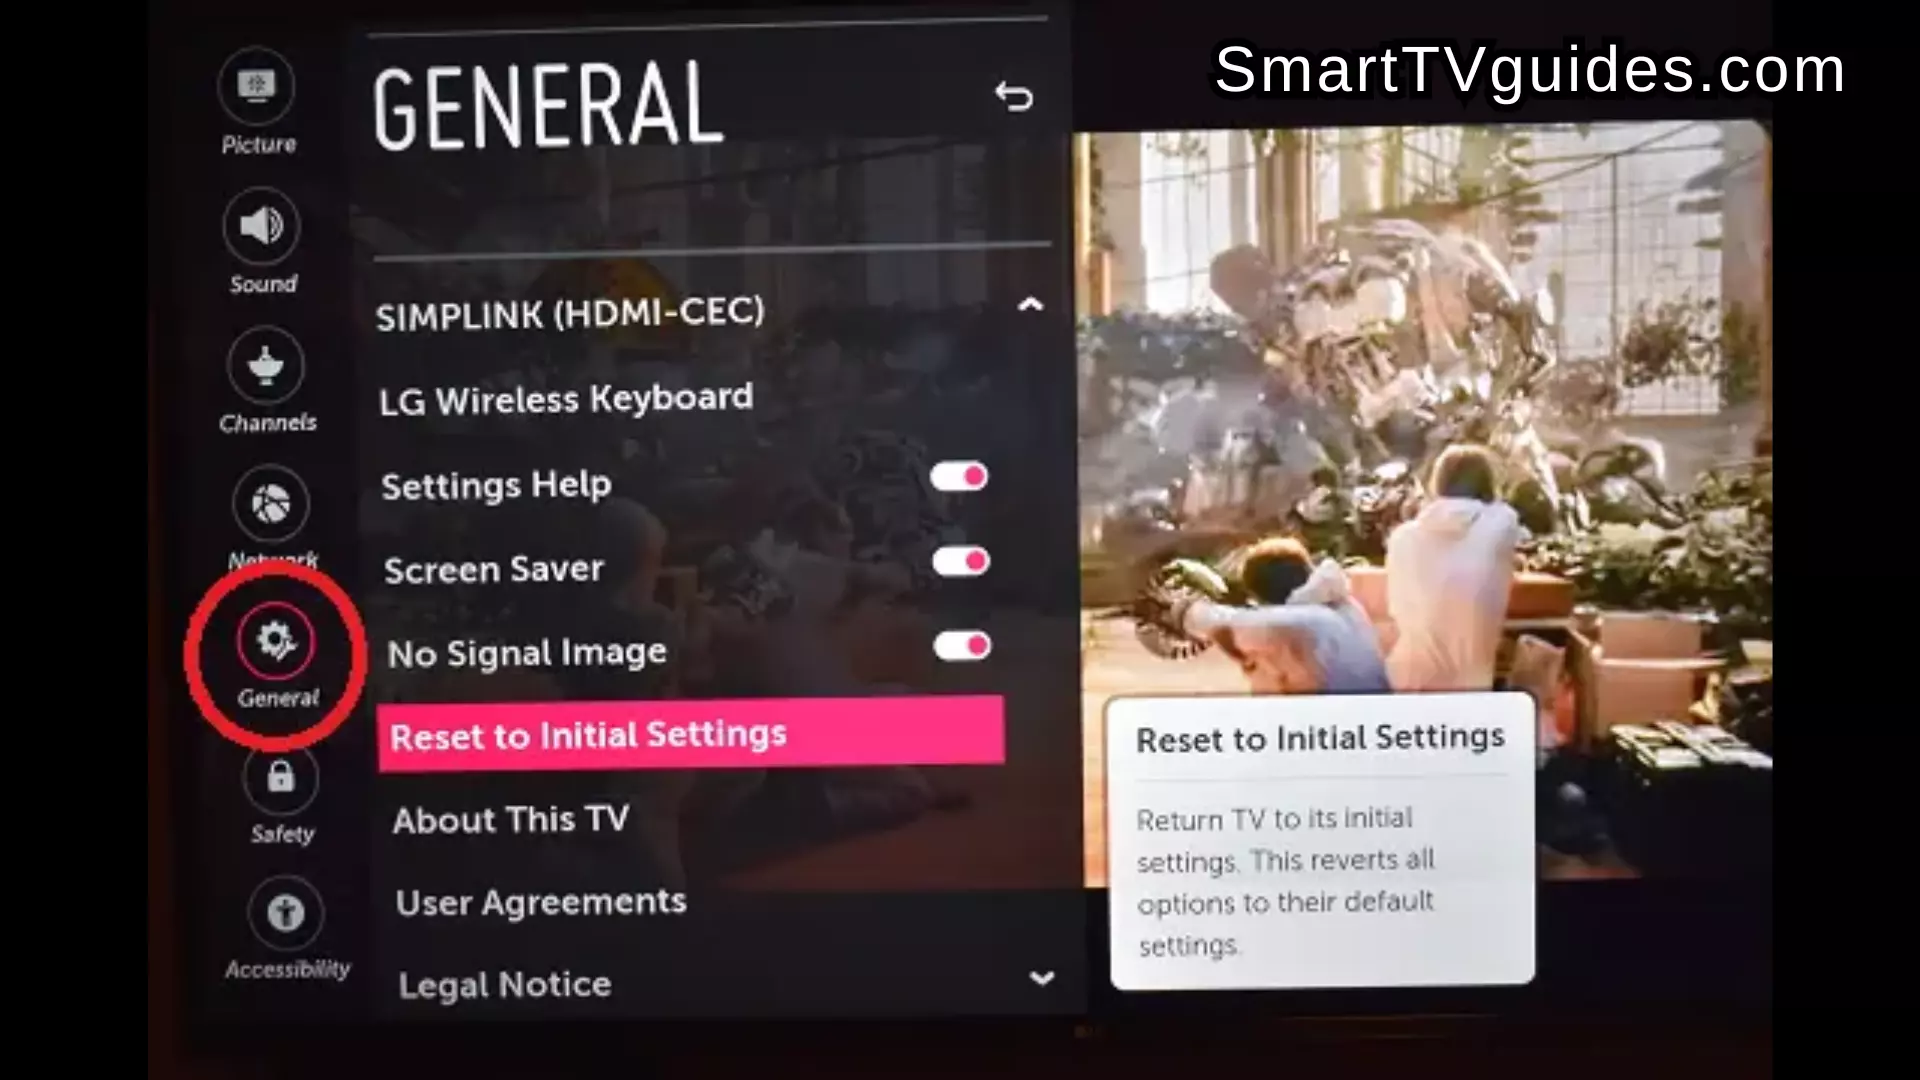 How to Factory Reset LG TV Without Remote